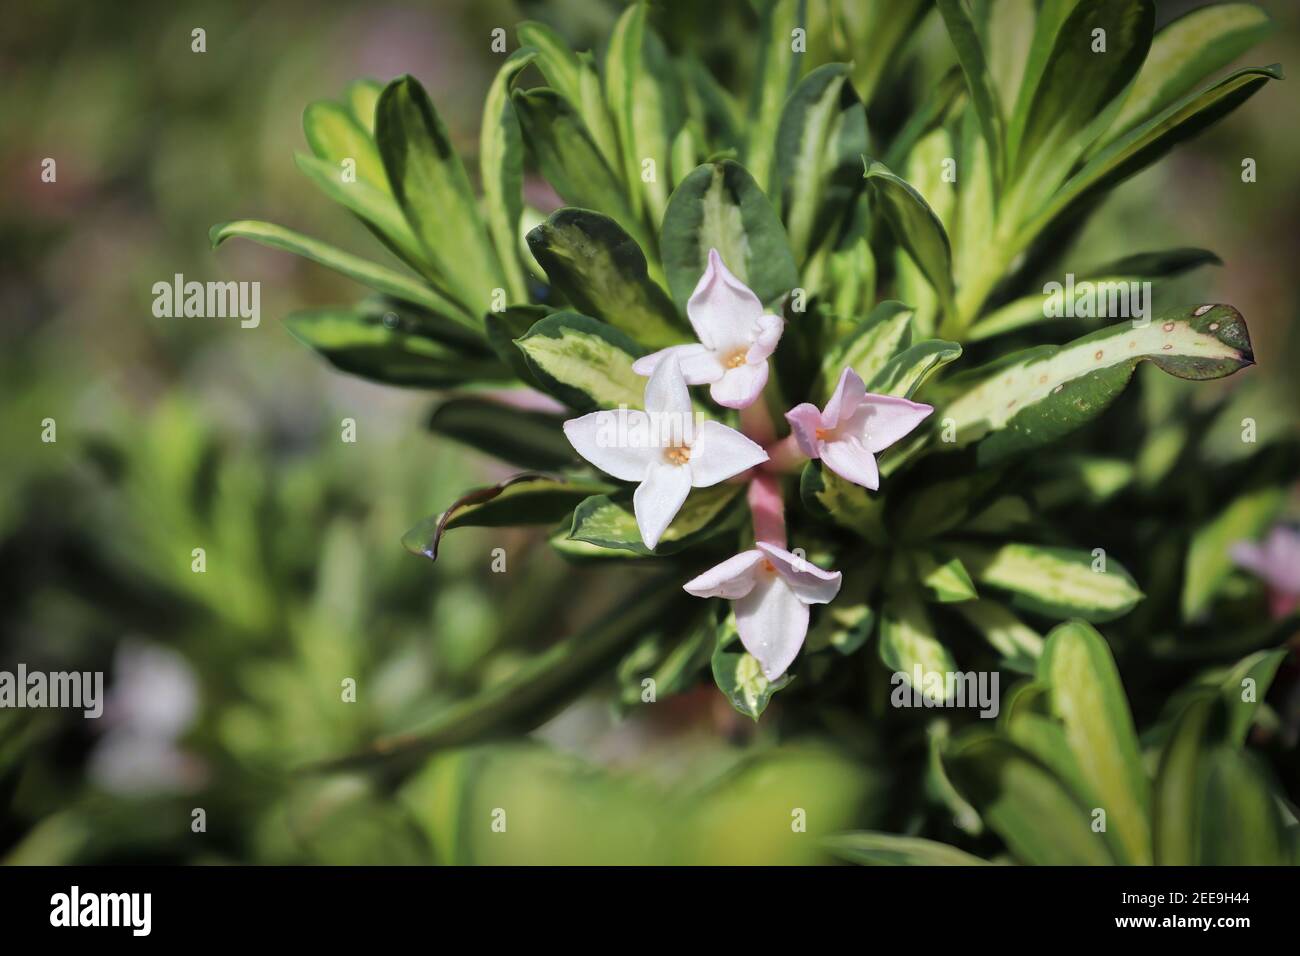 Closeup of variegated leaves on a daphne shrub Stock Photo